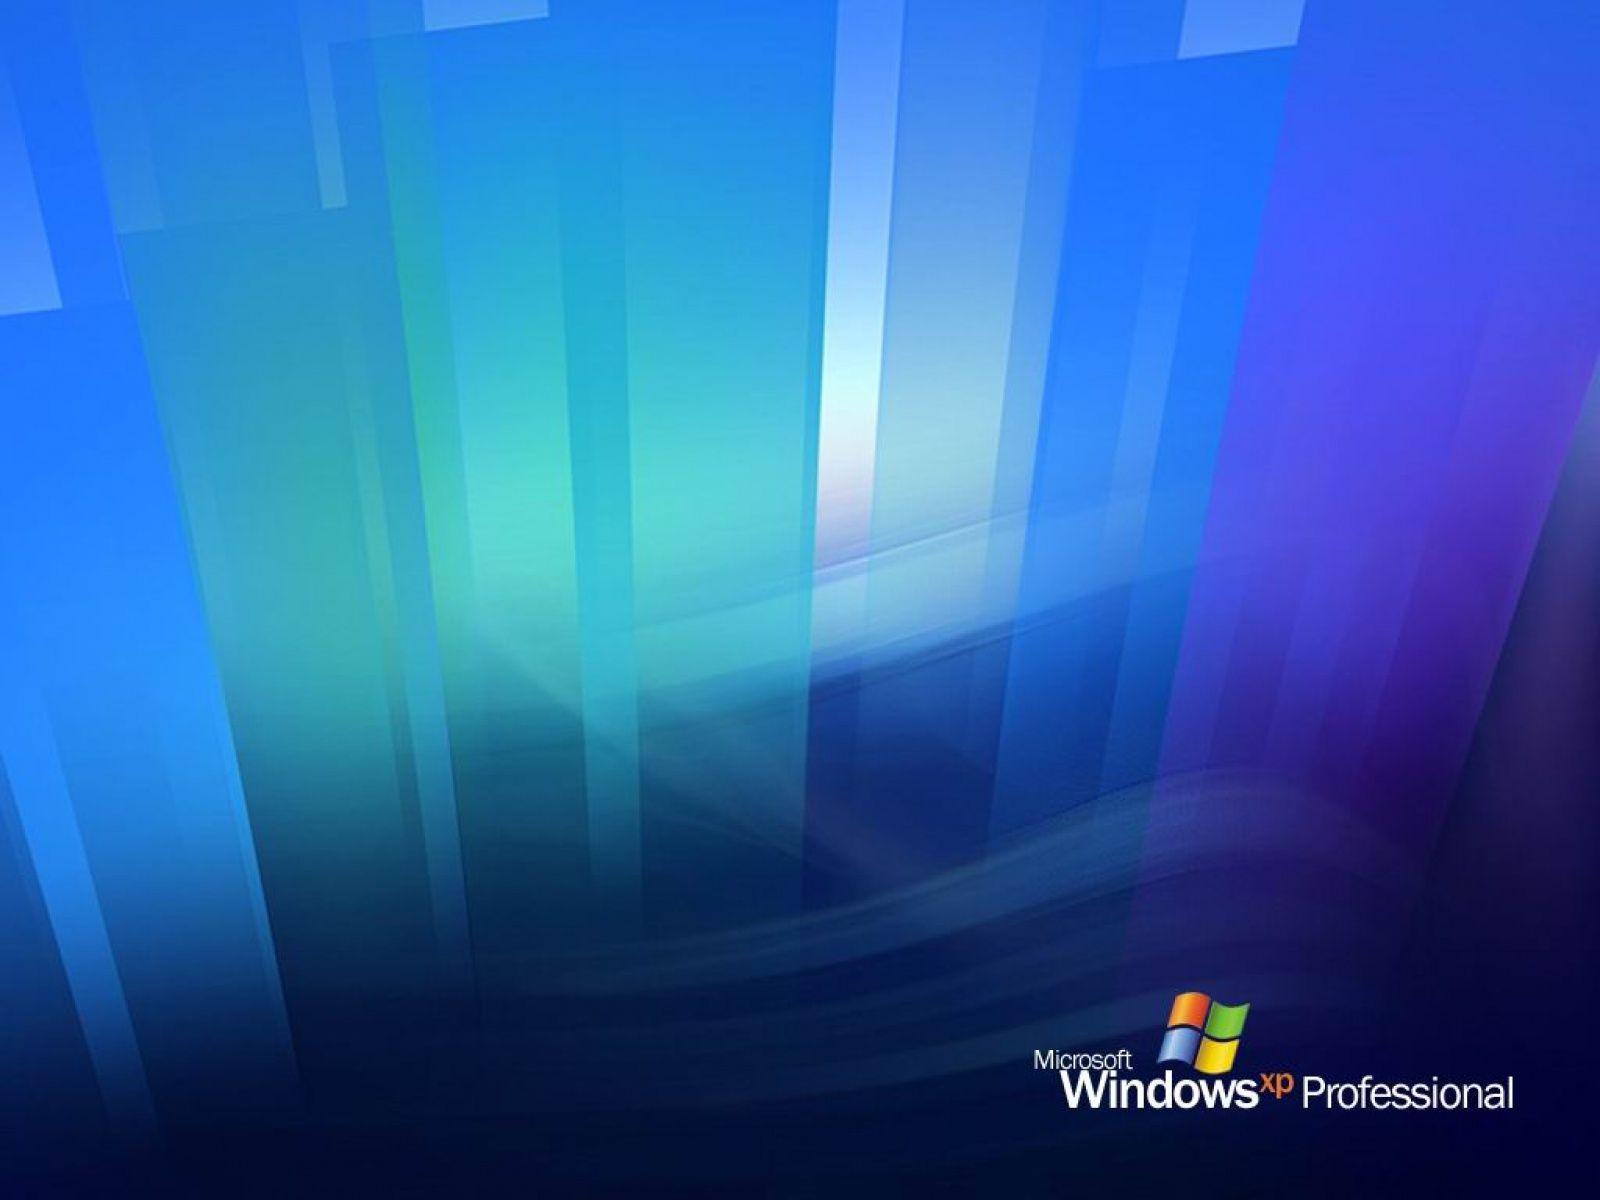 Wallpapers For > Windows Xp Professional Wallpapers